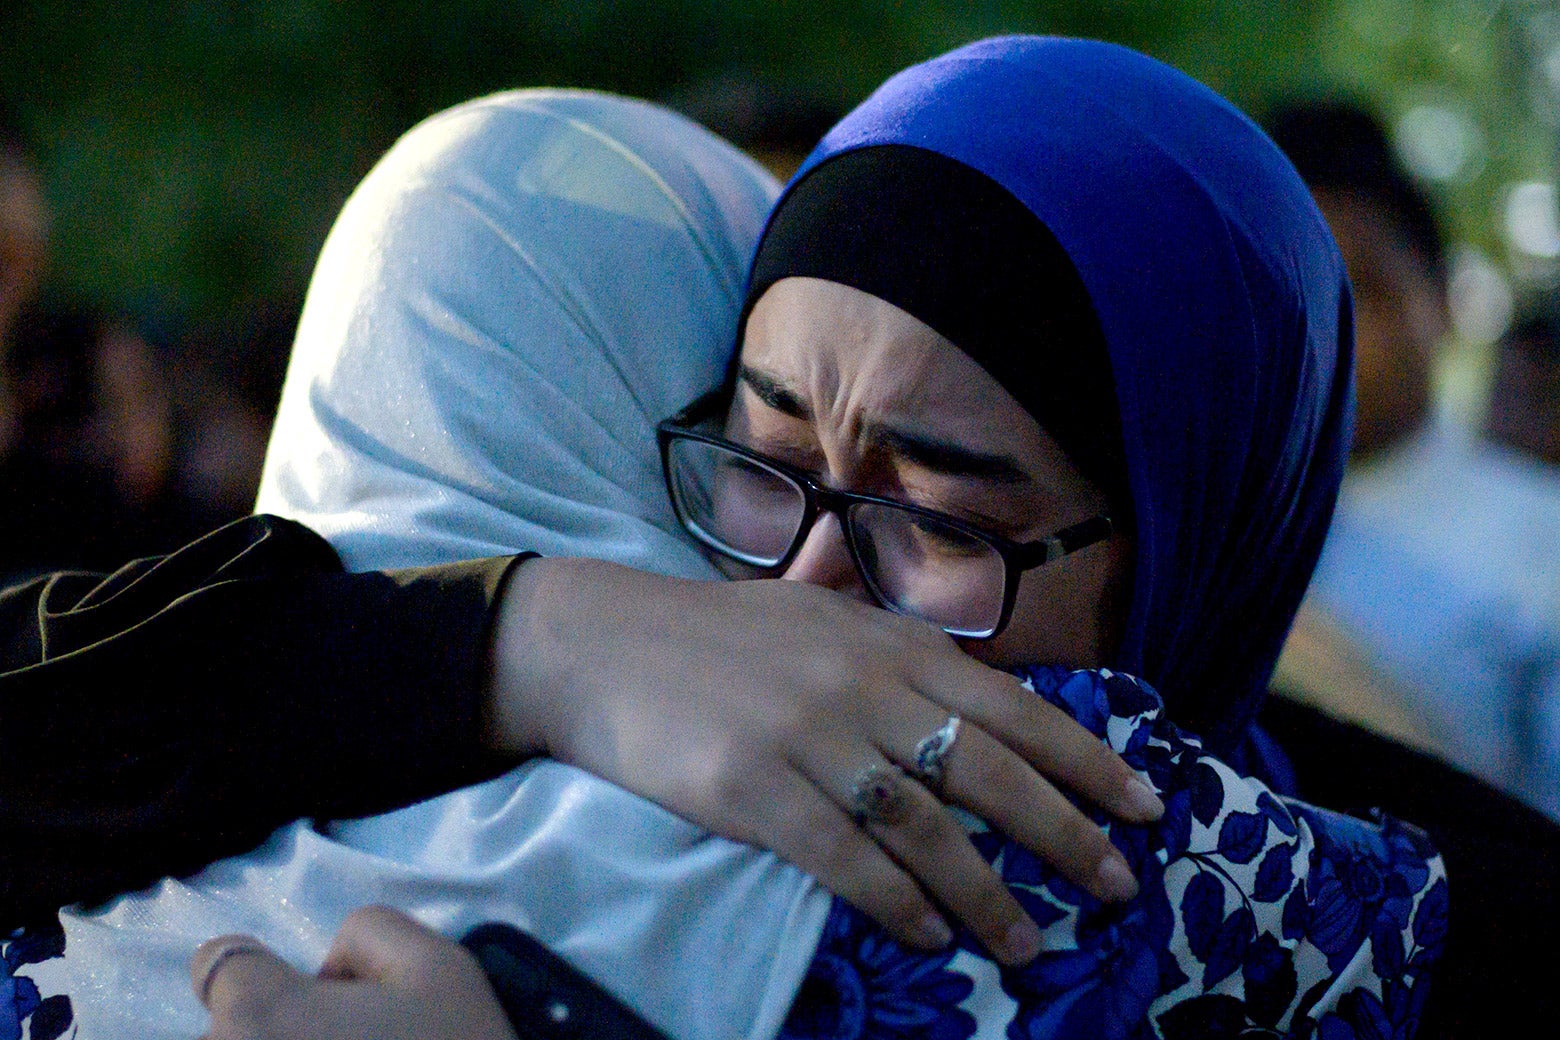 Two women wearing head scarves cry and hug.